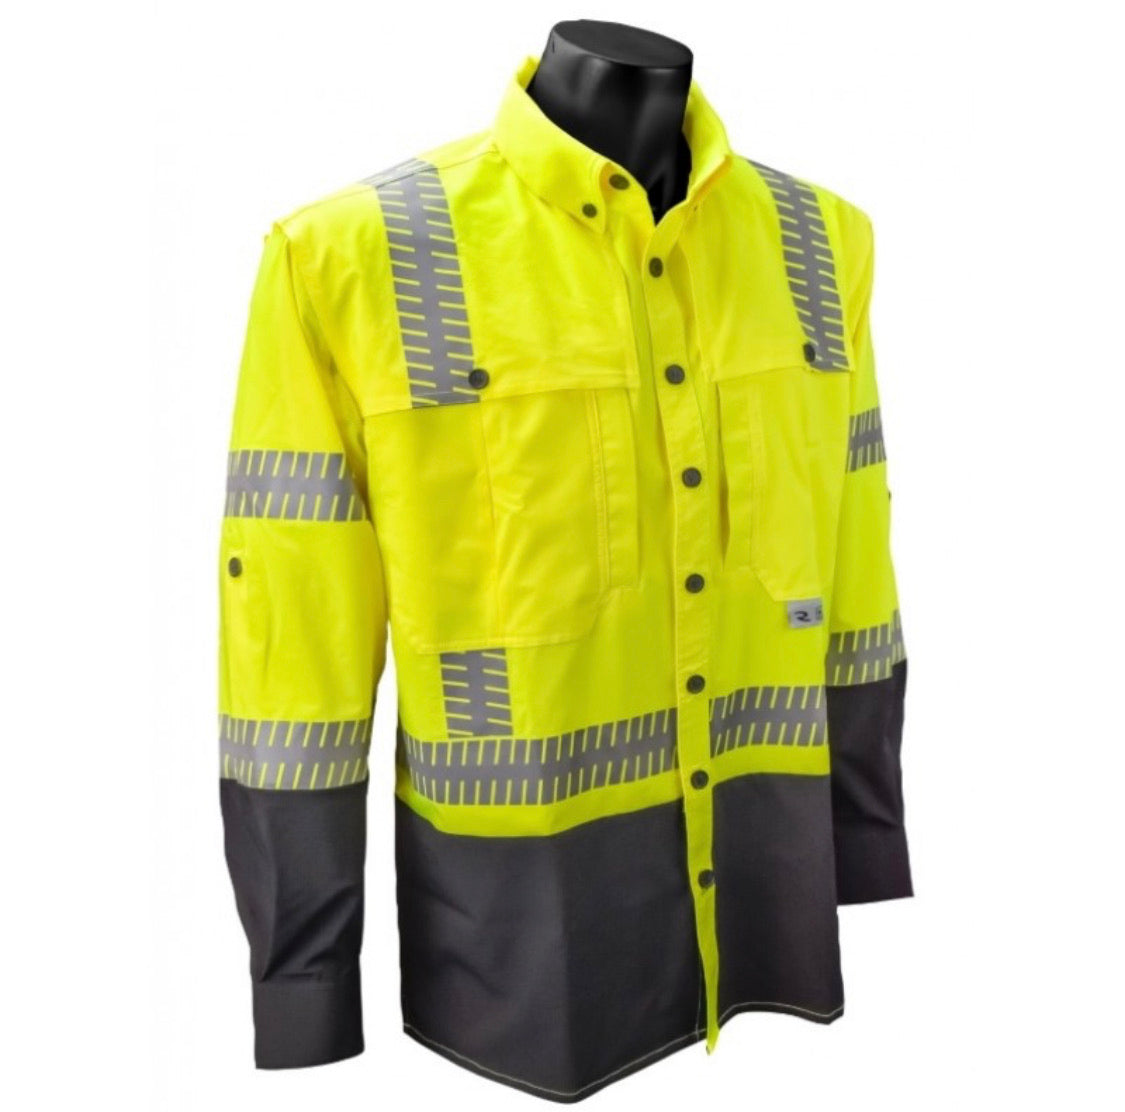 Safety Wear House sells safety items, FR, and steel toe boots.